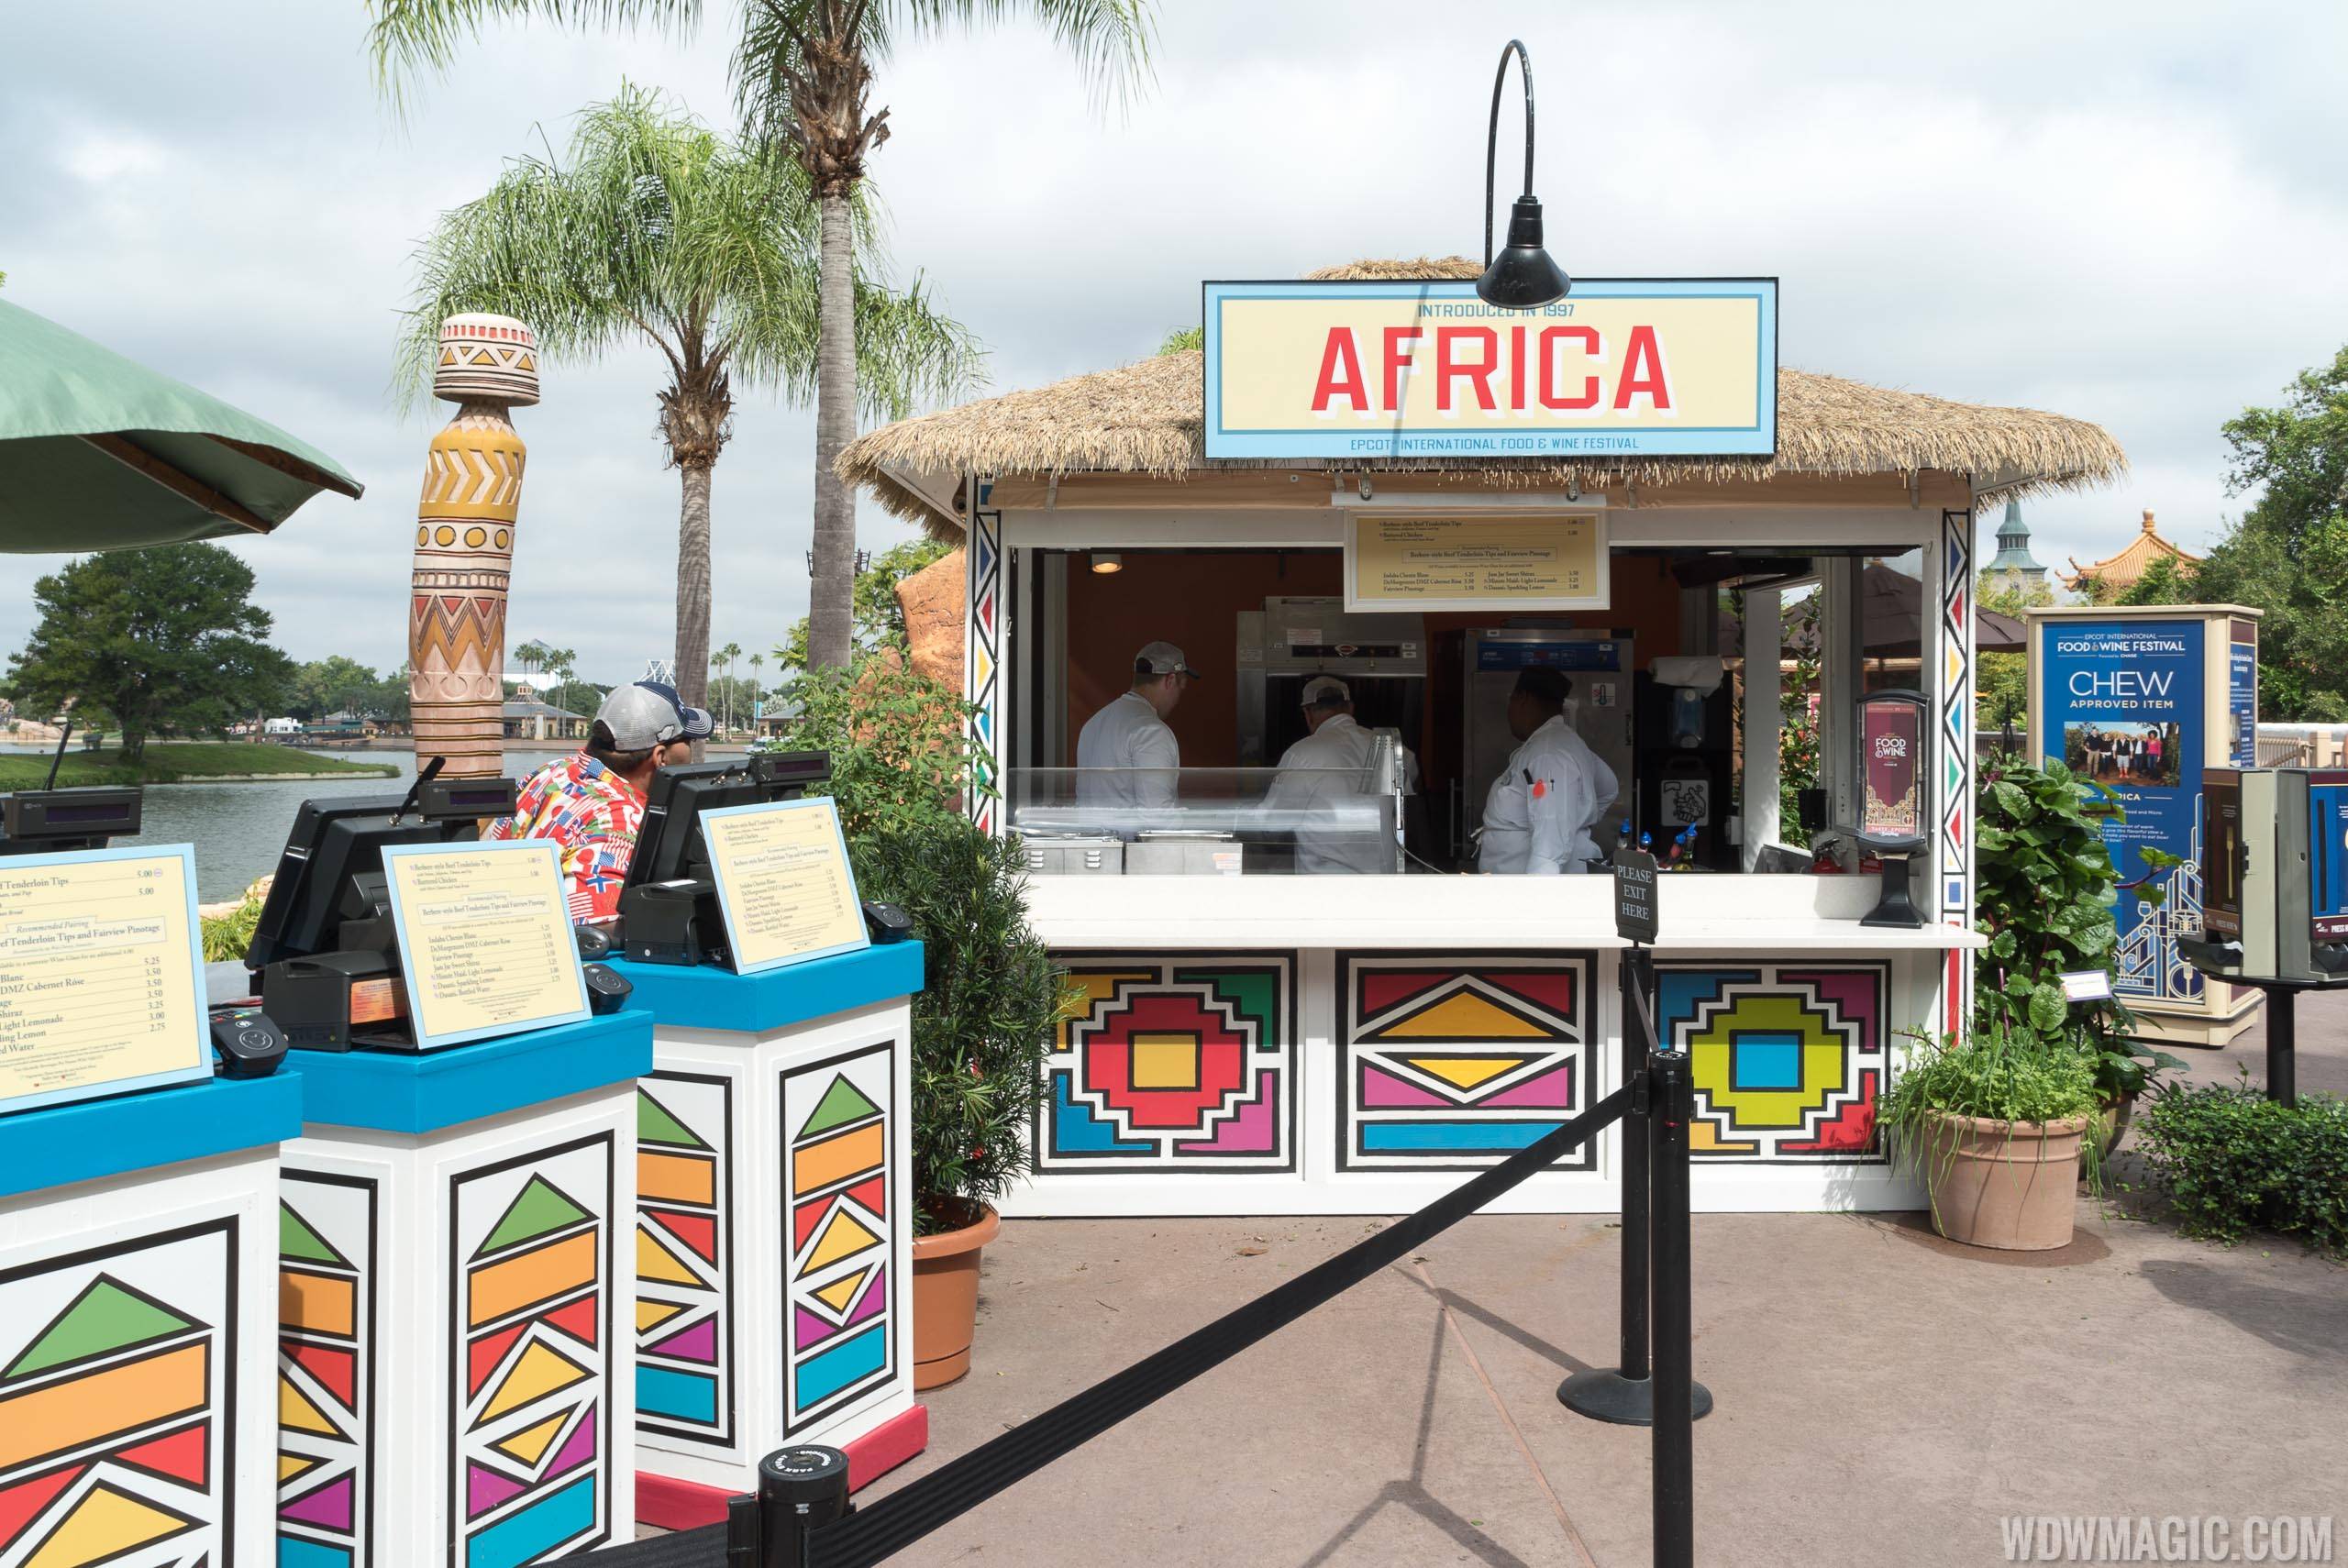 2015 Epcot Food and Wine Festival Marketplace kiosk - Africa